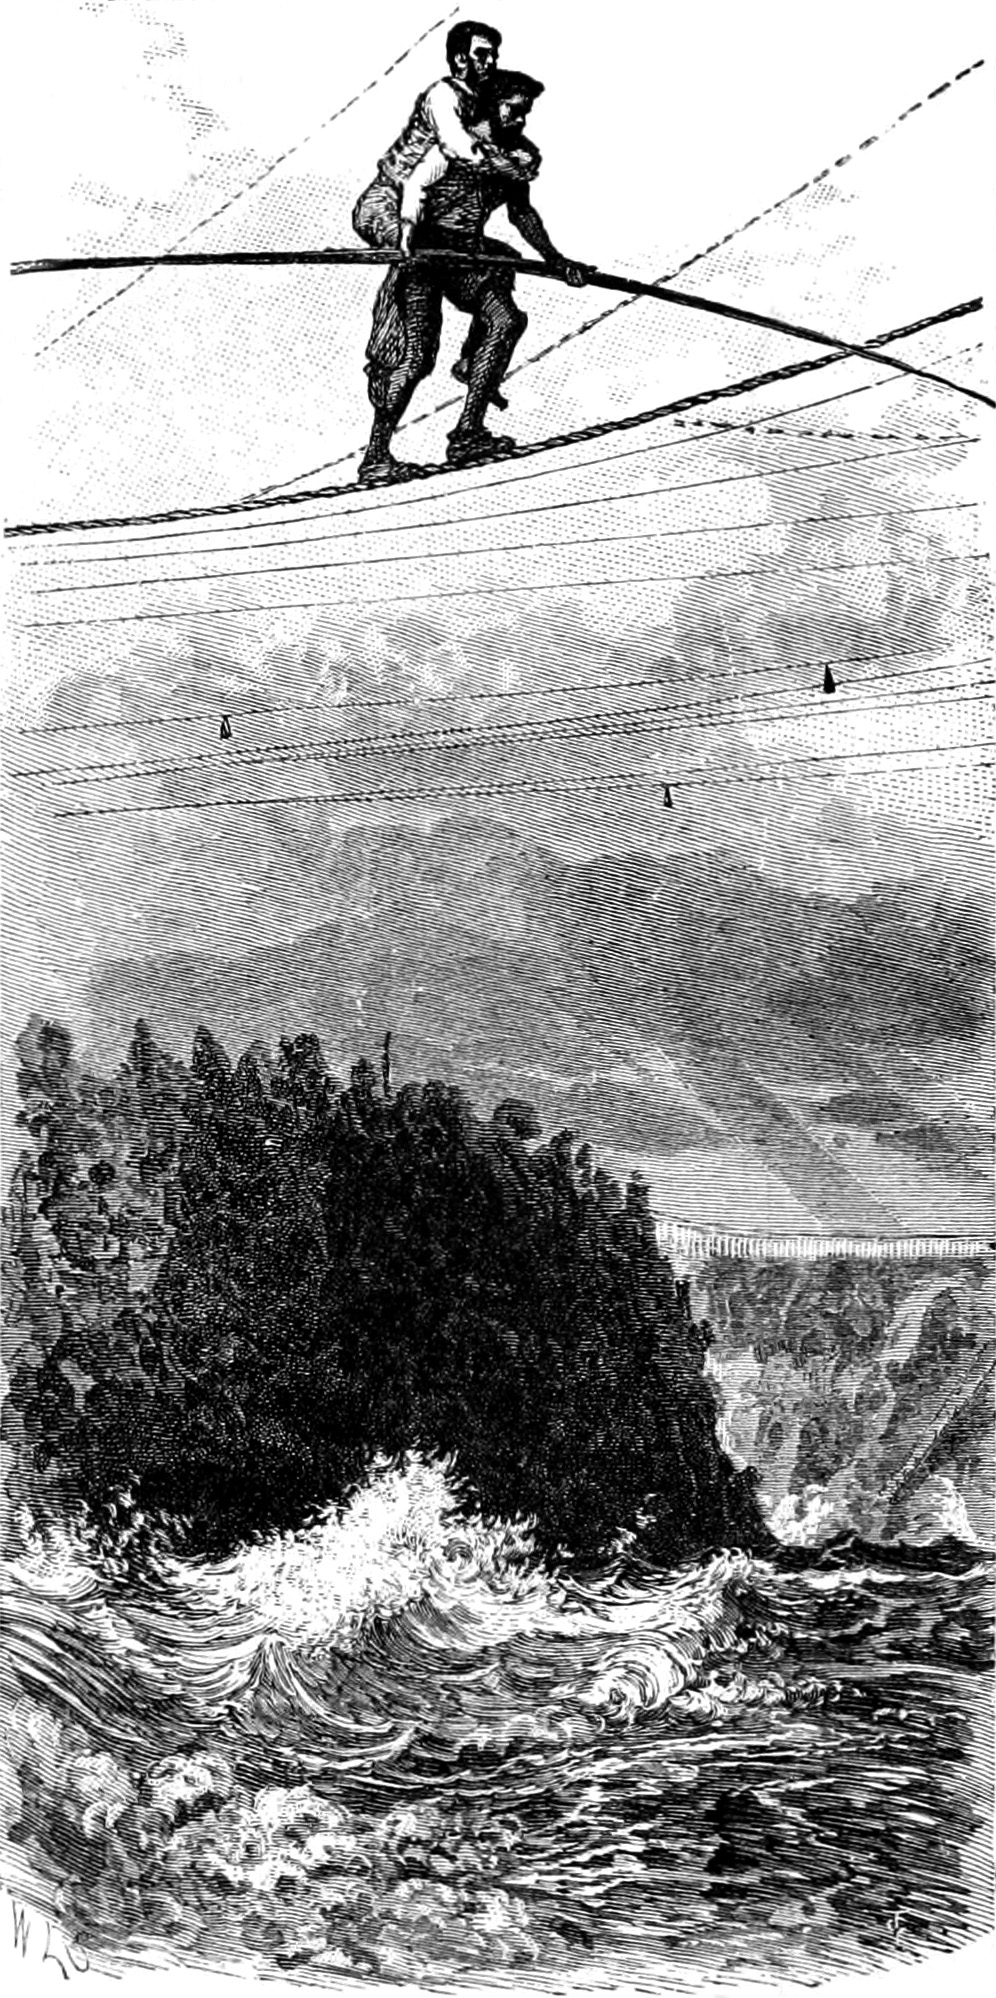 Engraving of Blondin crossing a tightrope over the Niagara River while piggy-backing his manager. Holley, George (1883). Via Wikimedia Commons.